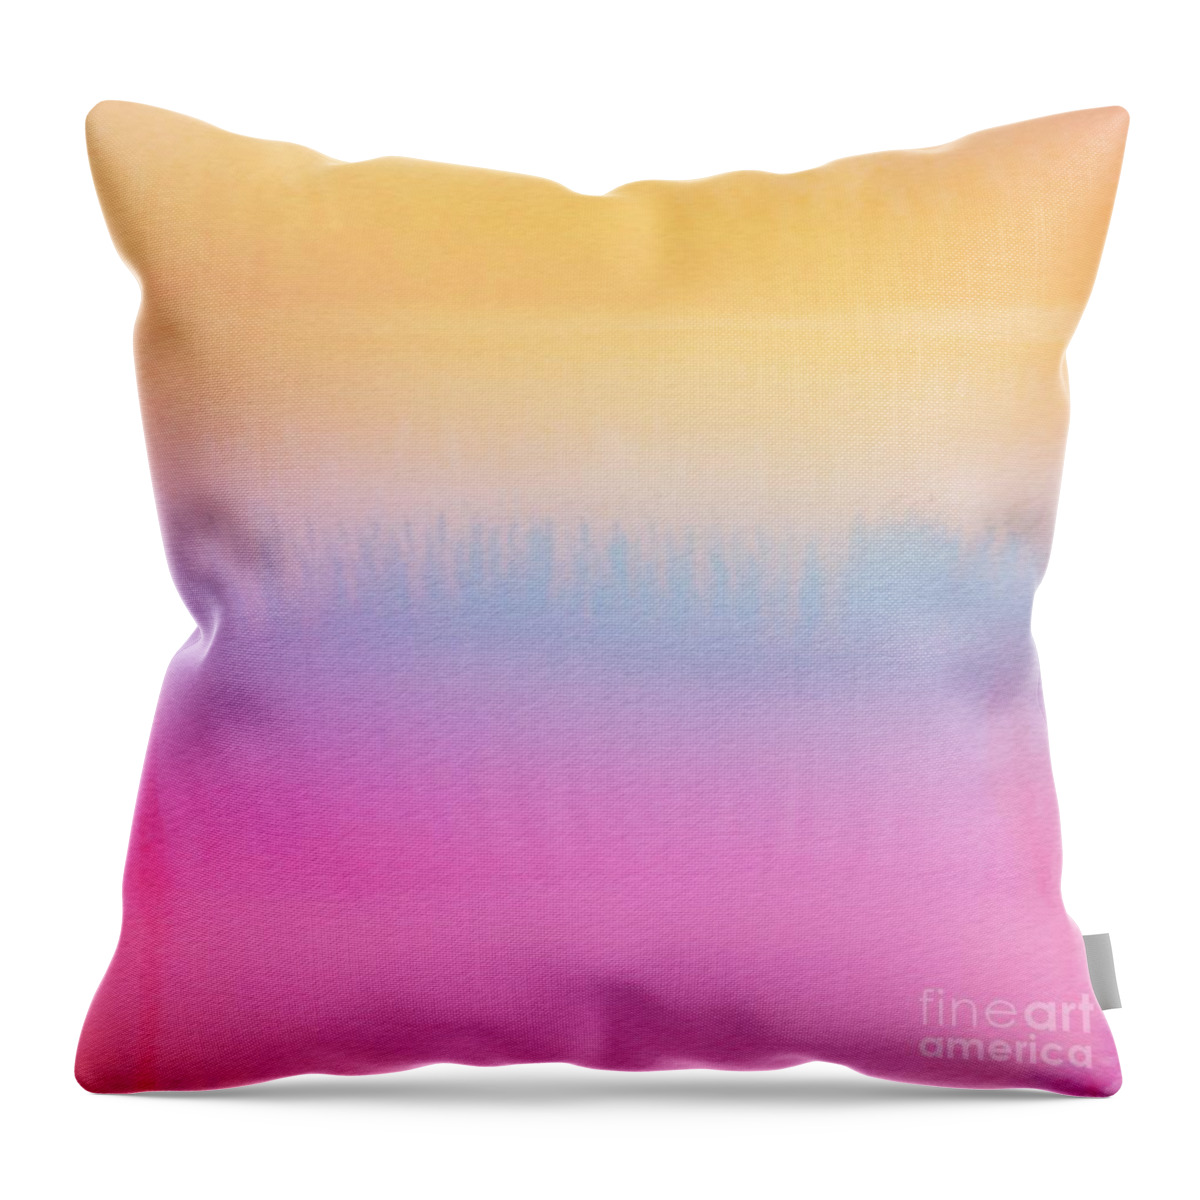 Watercolor Throw Pillow featuring the digital art Flagi - Artistic Colorful Abstract Yellow Pink Watercolor Painting Digital Art by Sambel Pedes